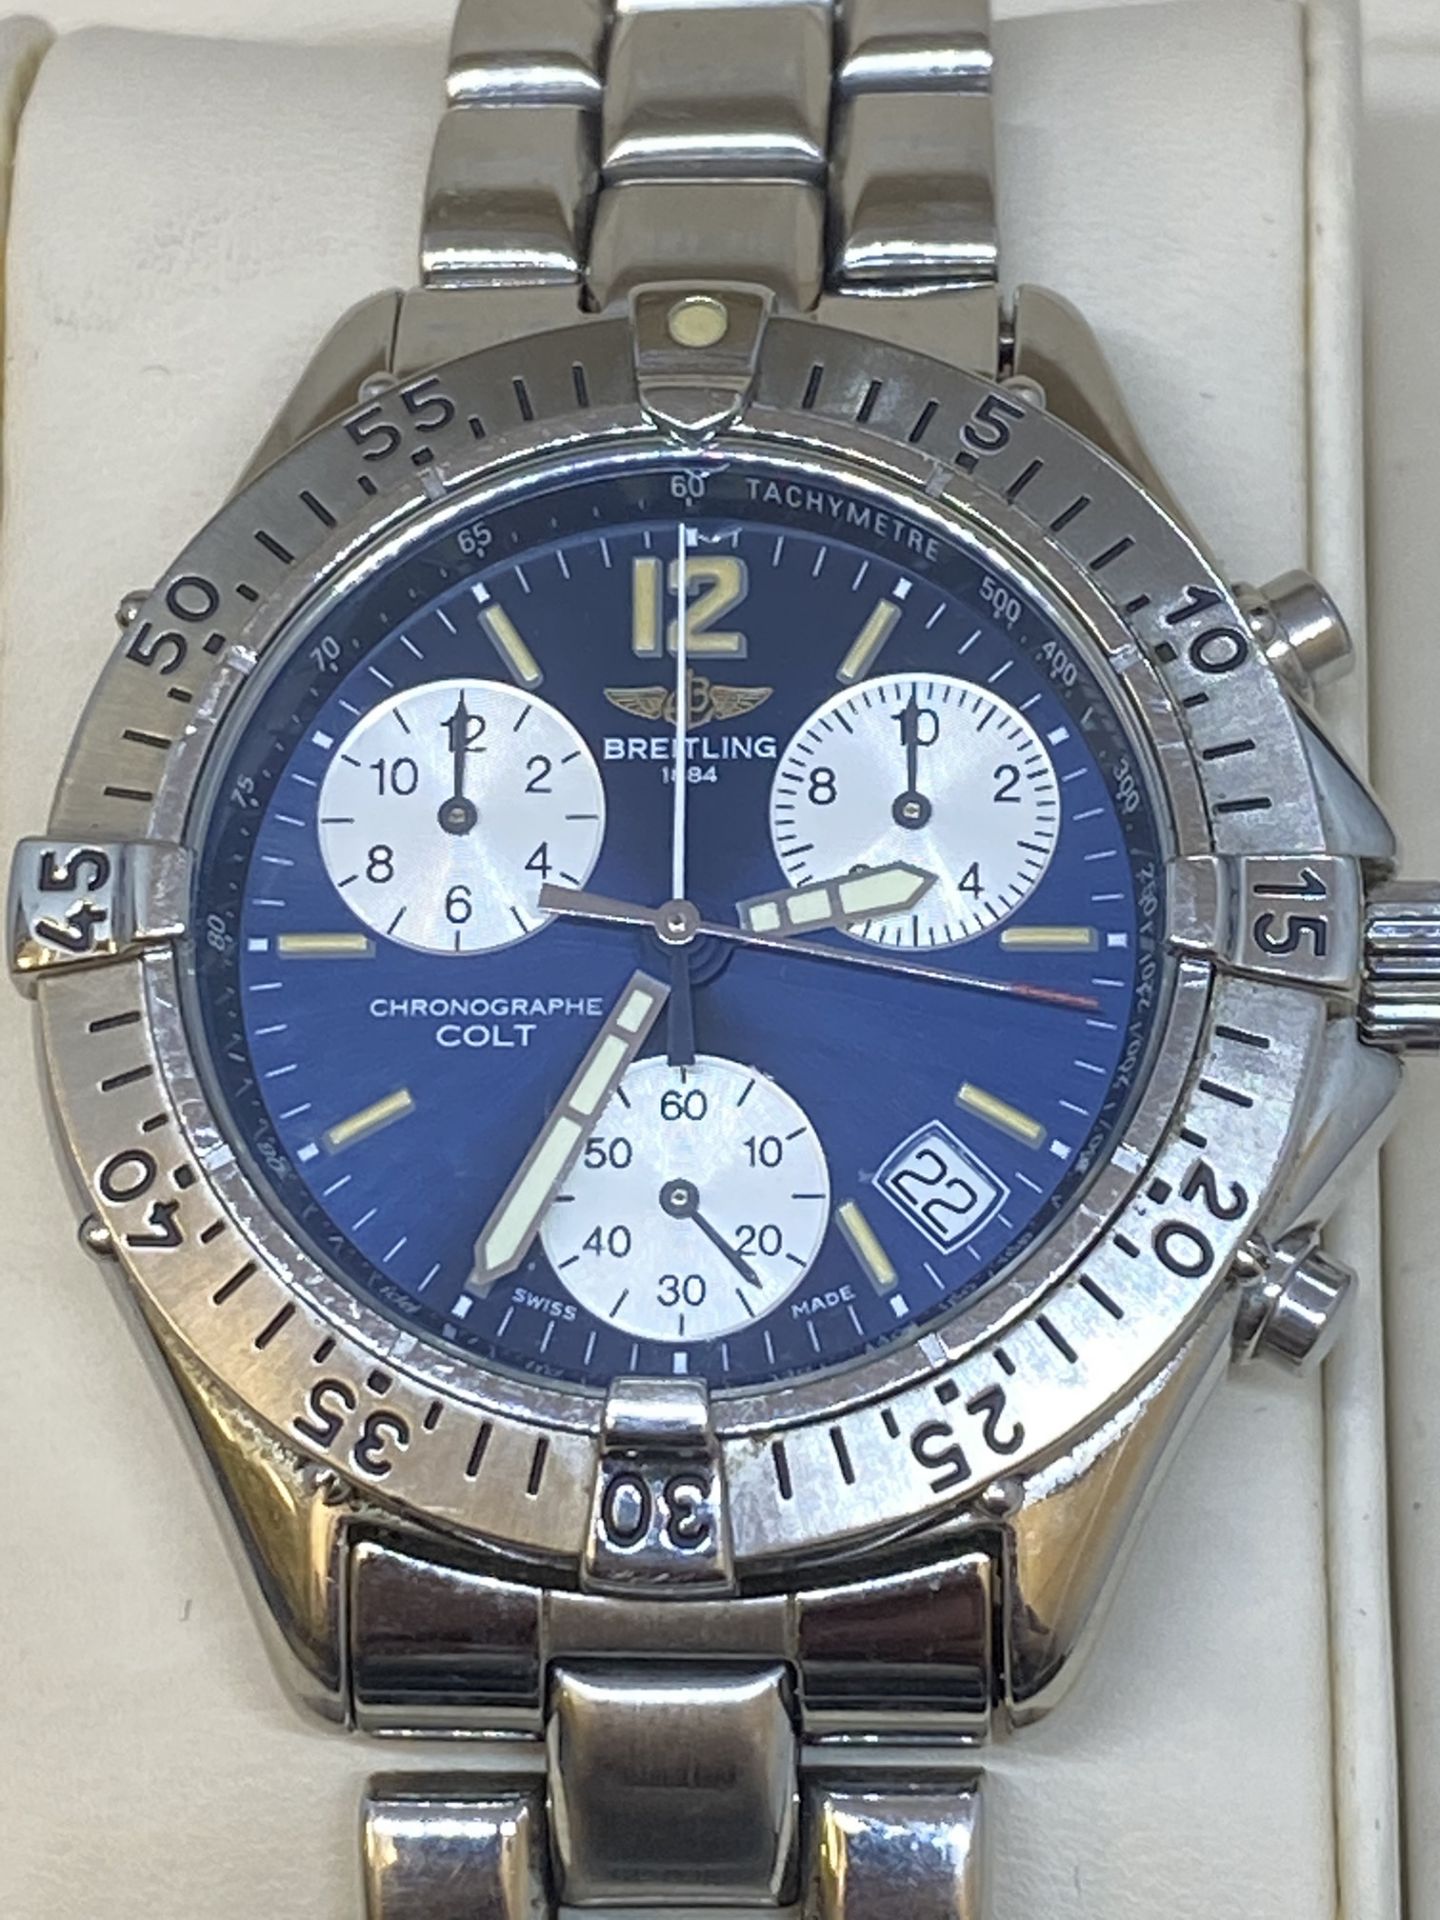 BREITLING CHRONOGRAPH STAINLESS STEEL WATCH - Image 2 of 13